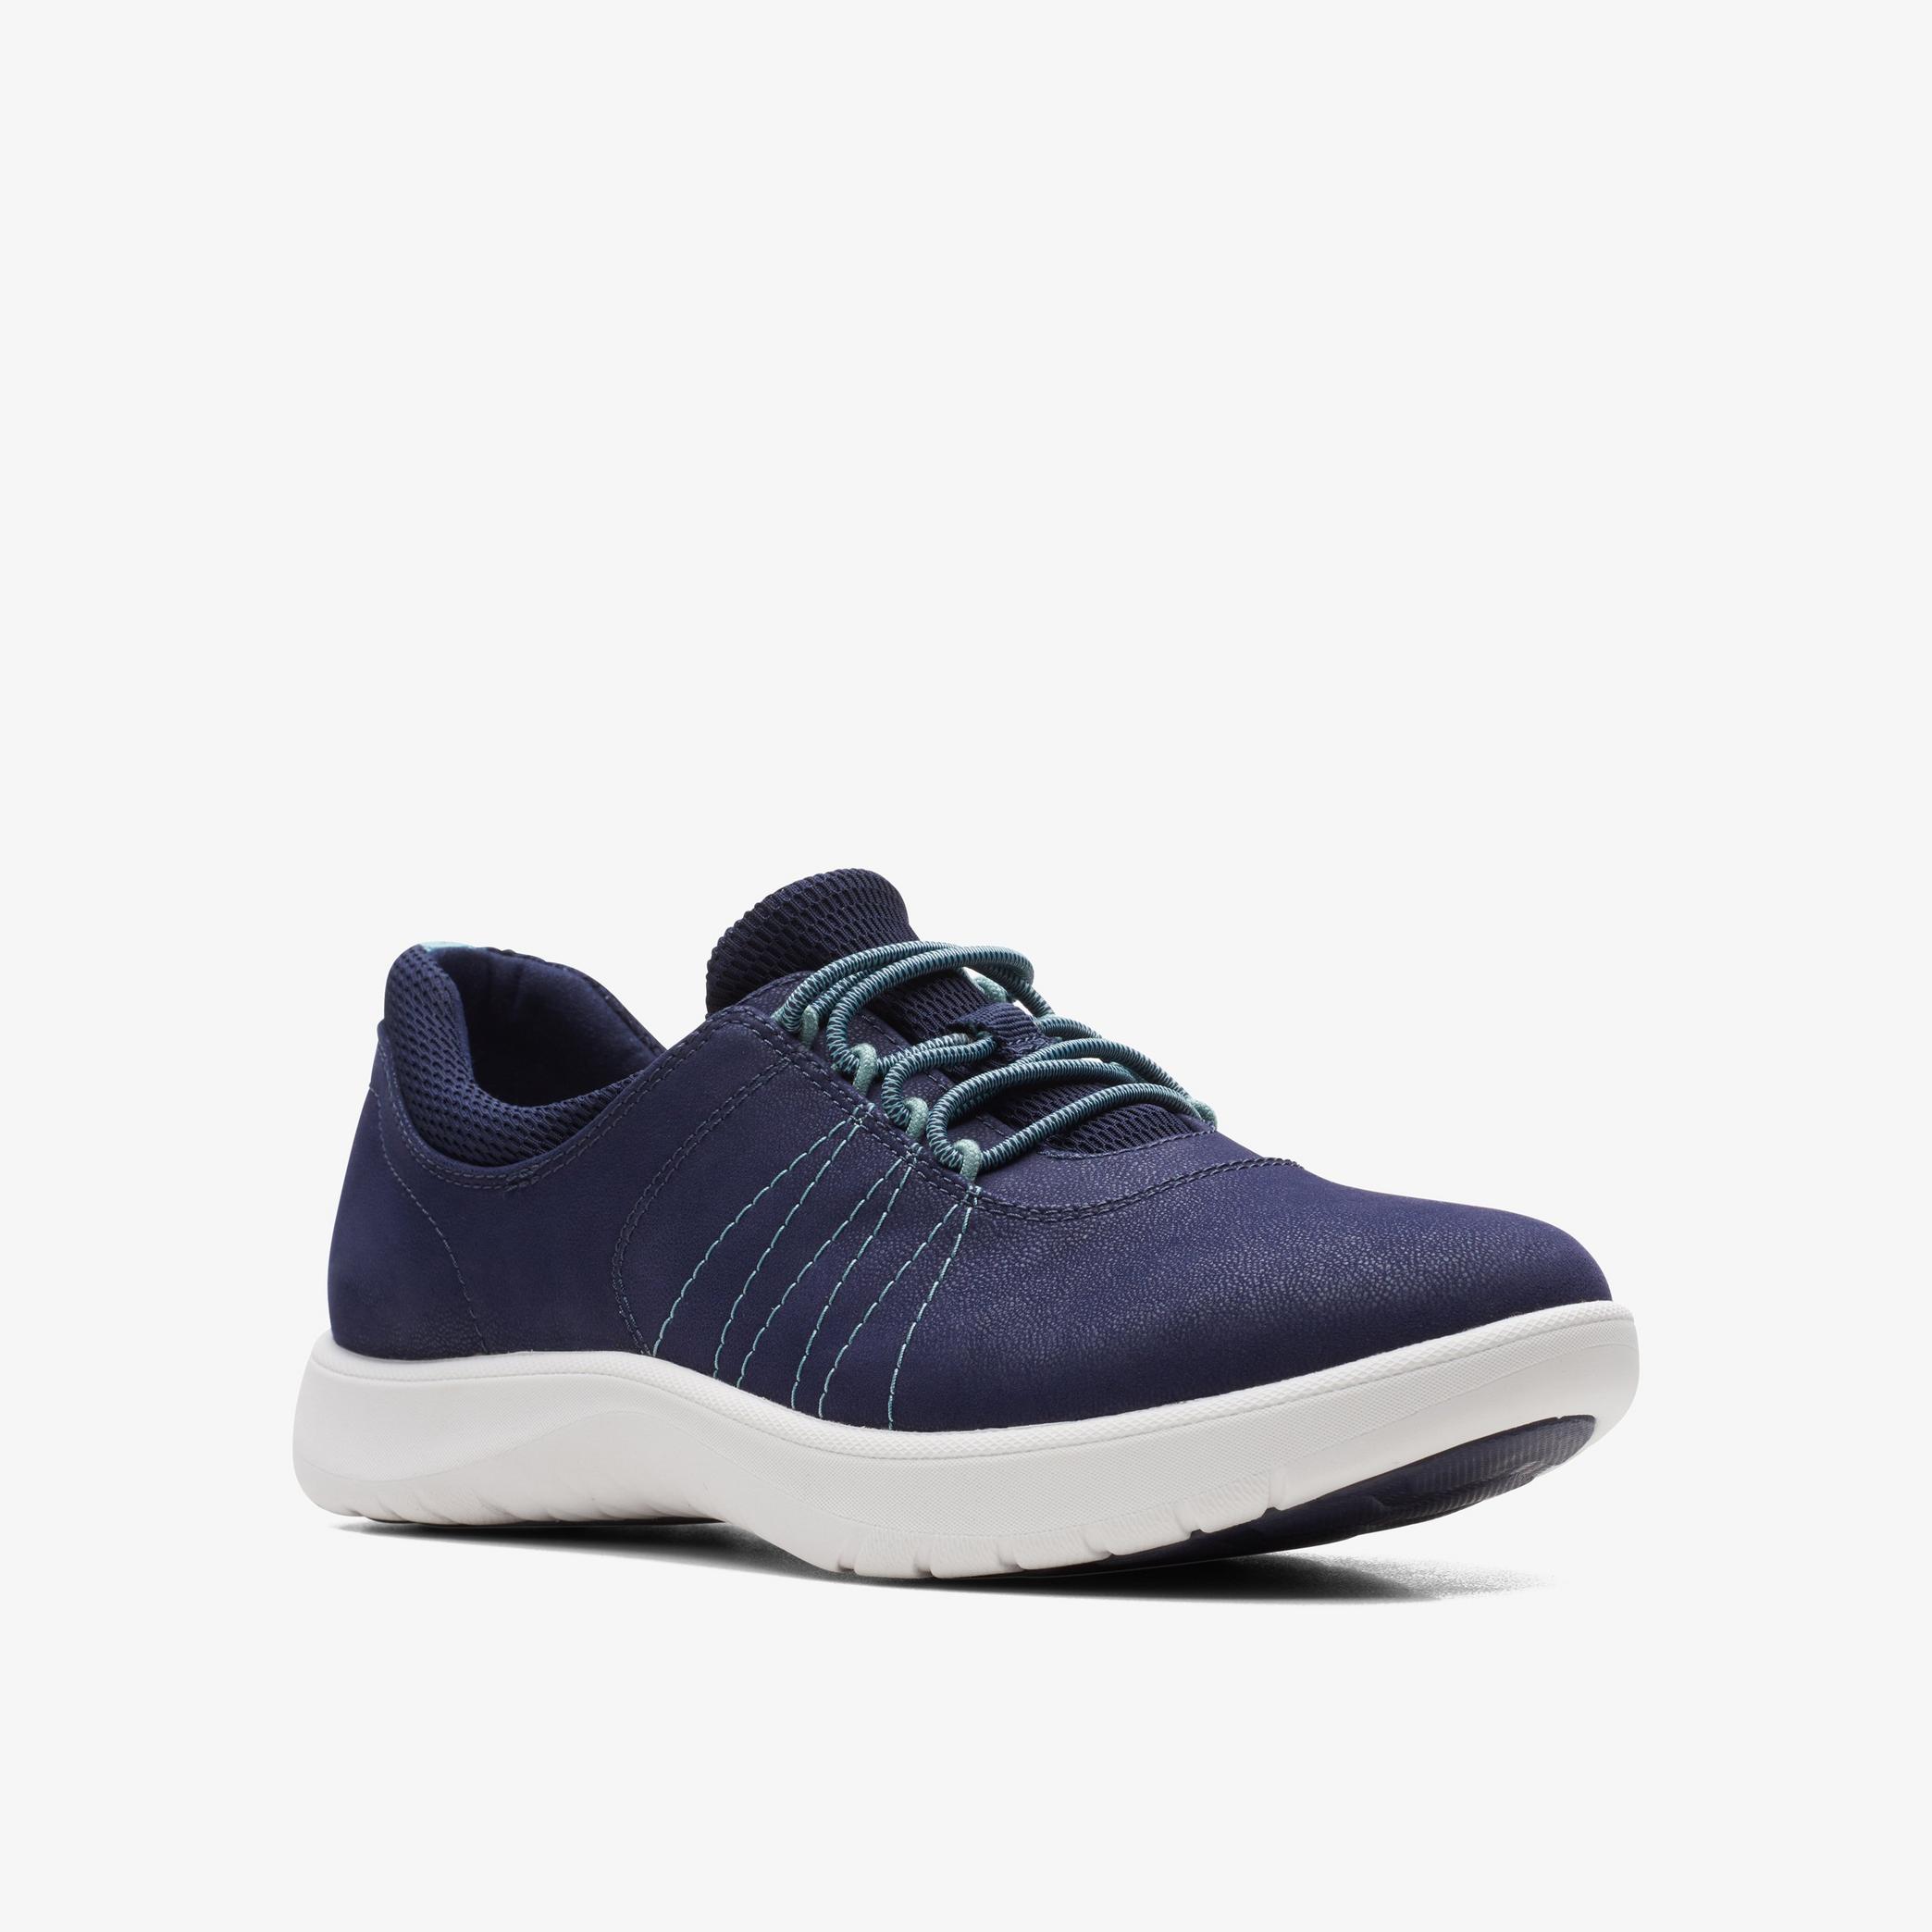 WOMENS Adella Stroll Dark Navy Trouser Shoes | Clarks Outlet